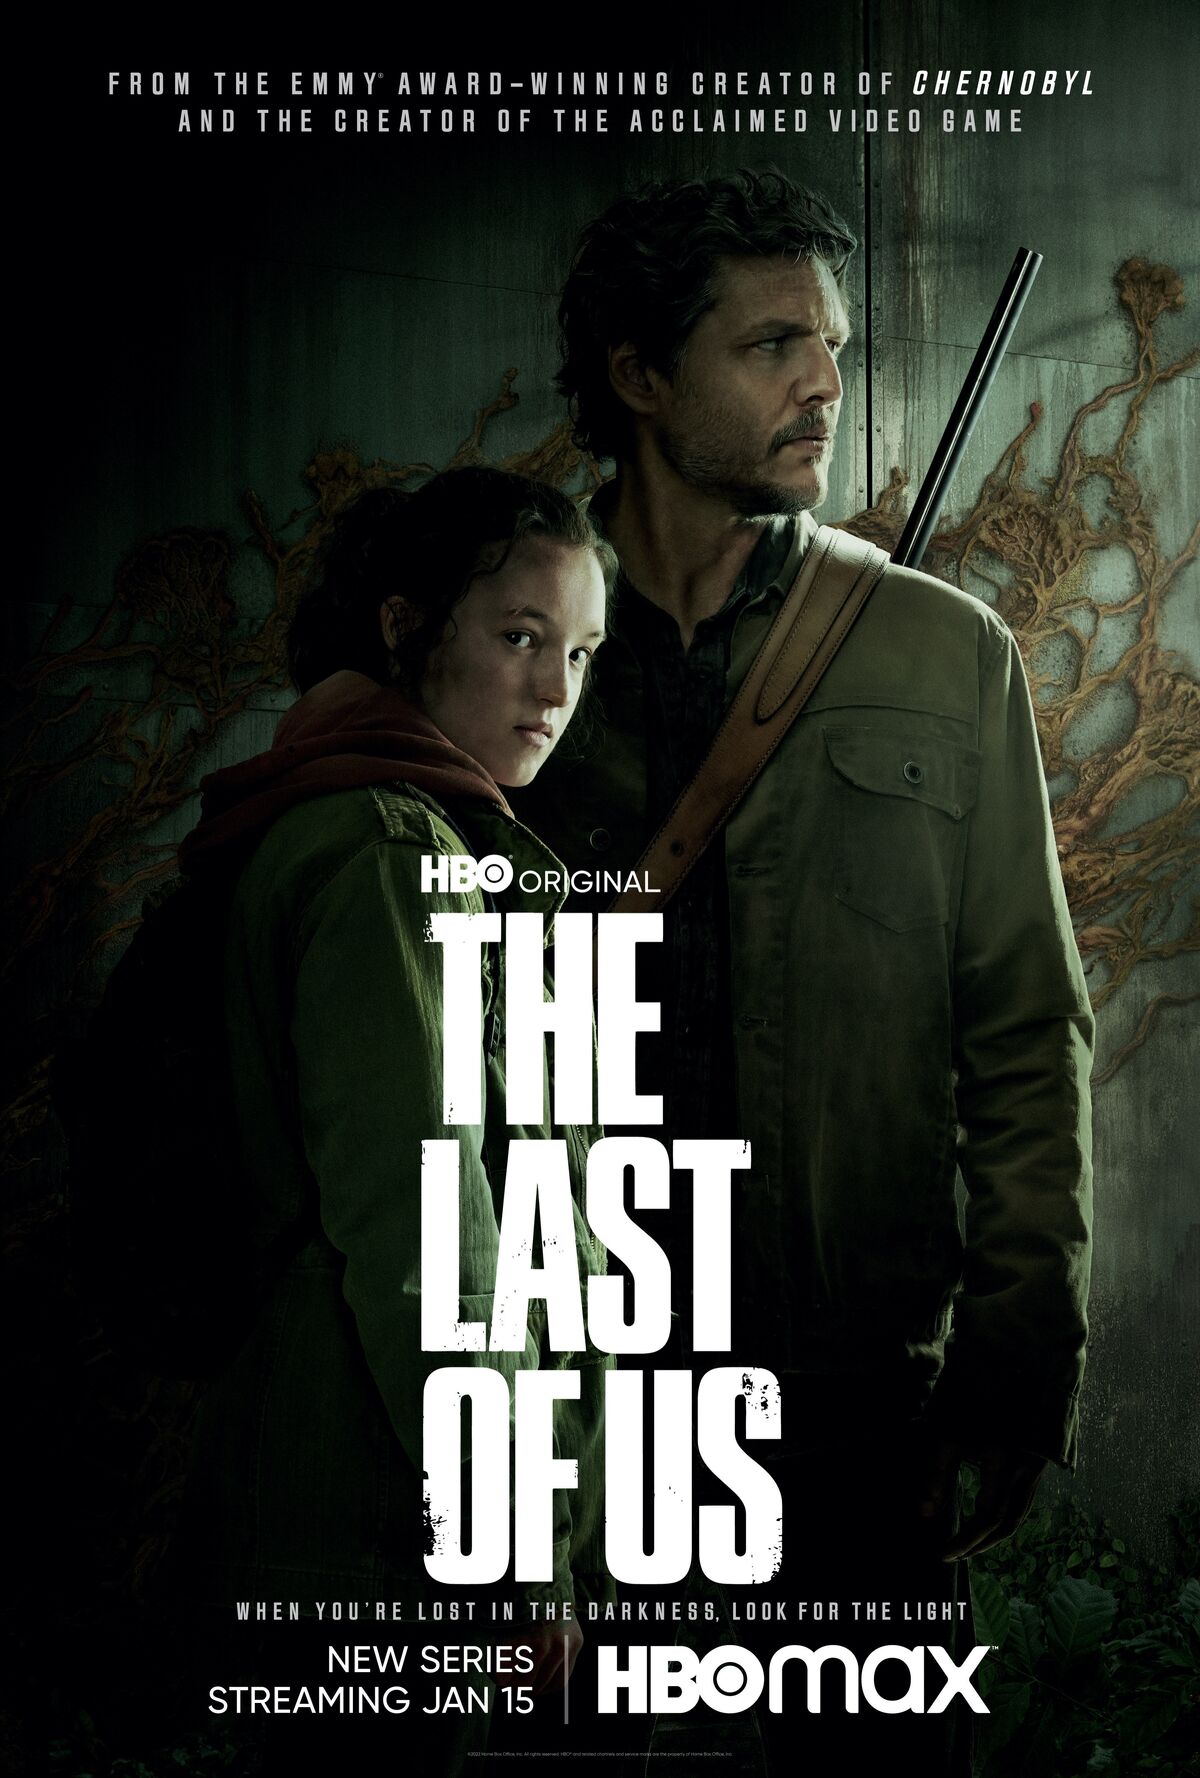 HBO's The Last of Us receives universal critical acclaim